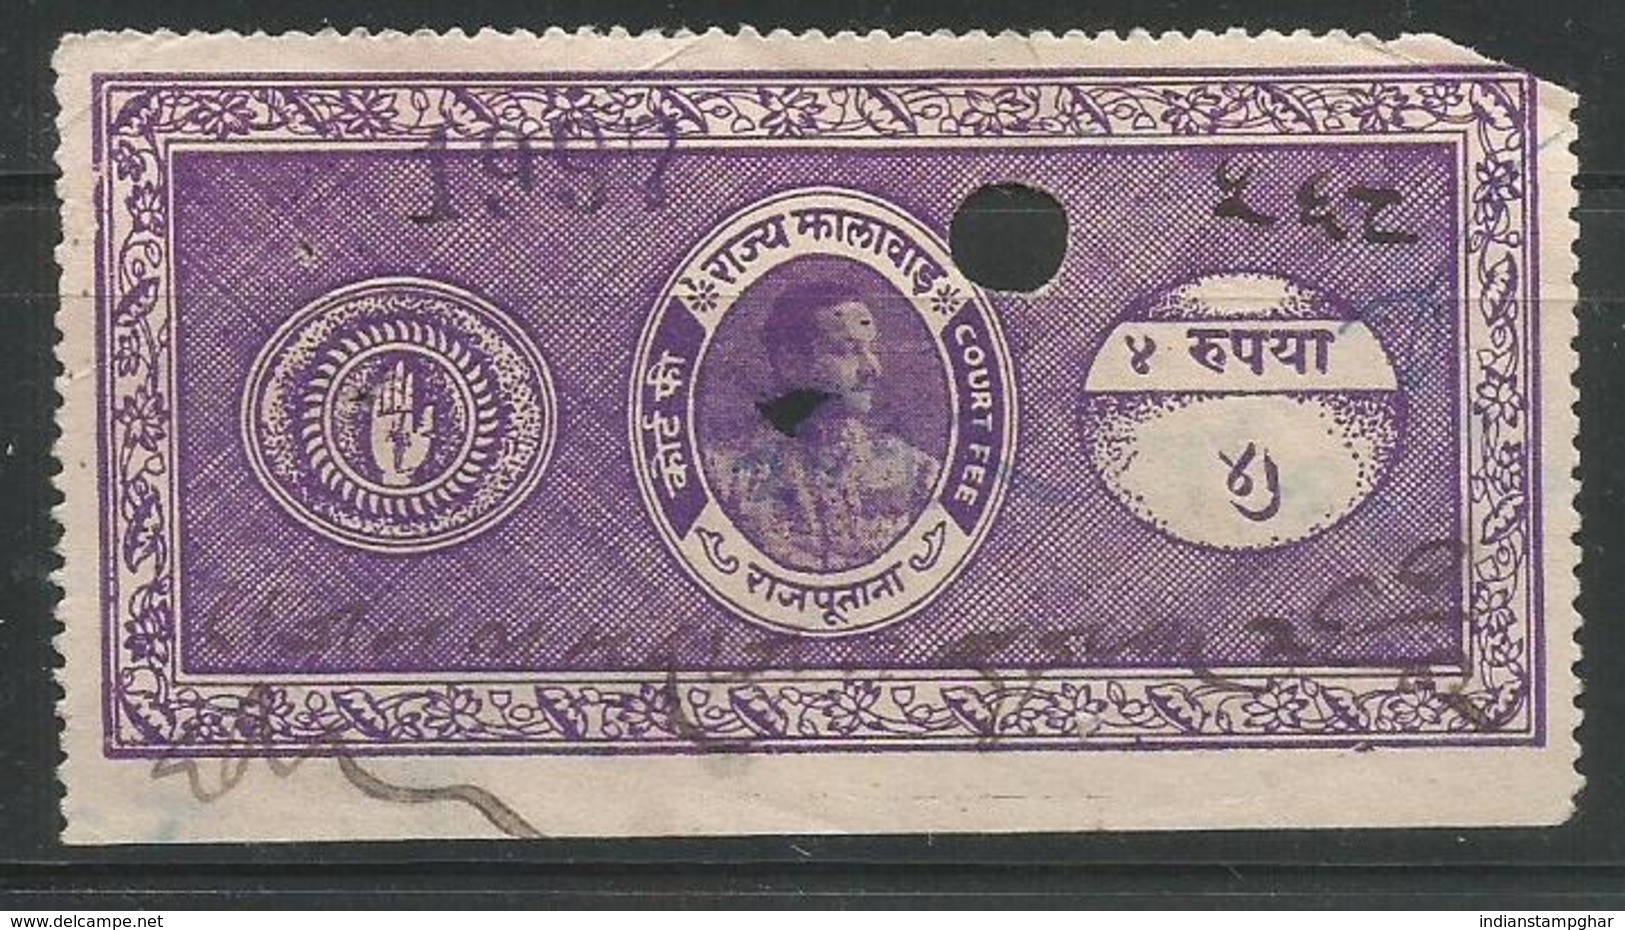 Jhalawar State 4 Rupee Violet (Unrecorded) Court Fee Type 21 Inde Indien India Fiscaux Fiscal Revenue - Jhalawar